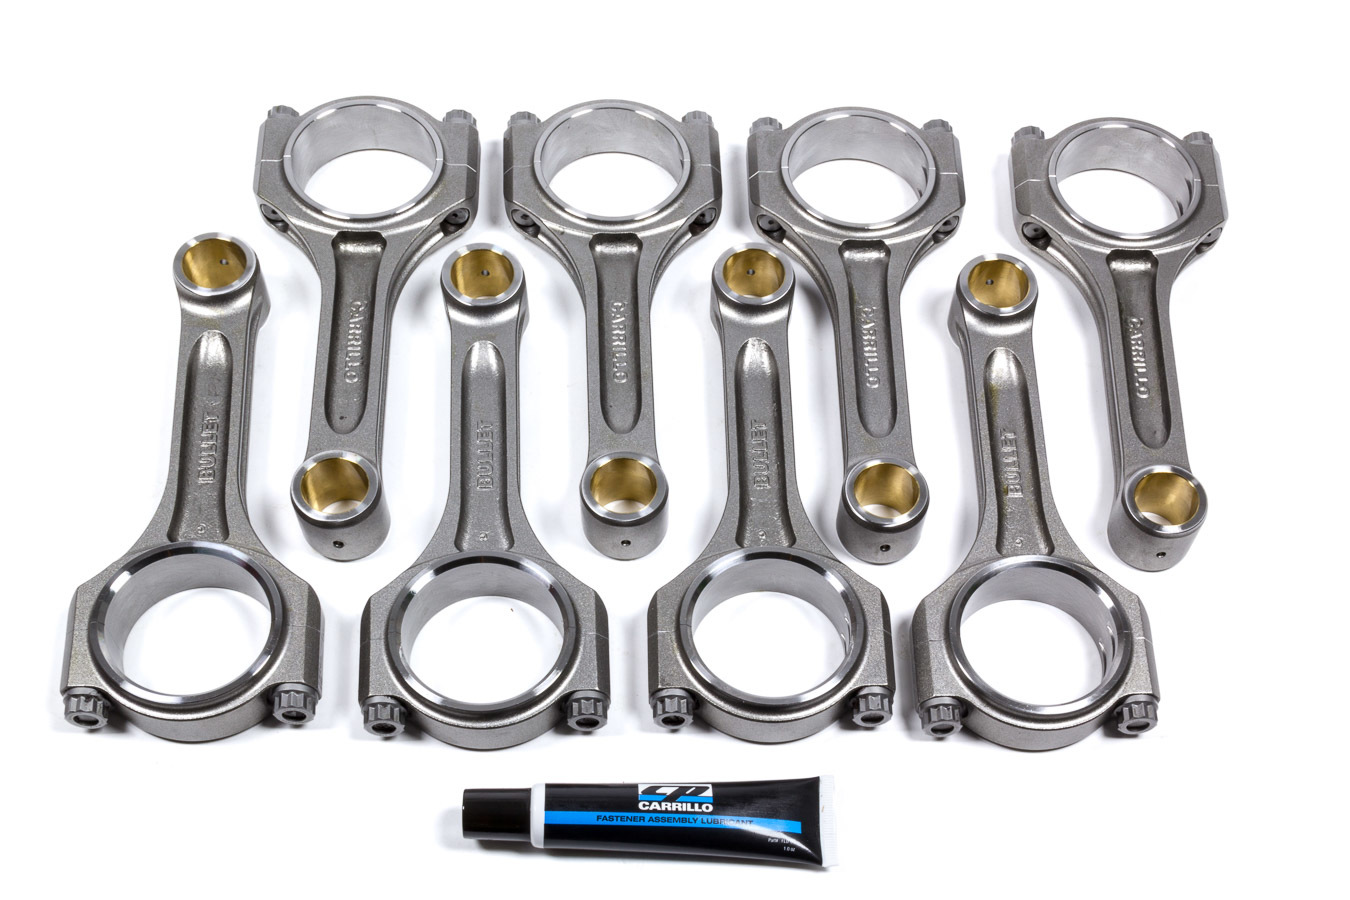 Bullet Pistons BC21-60071-8 Connecting Rod, I Beam, 6.000 in Long, Bushed, 7/16 in Cap Screws, Katech H11, Small Block Chevy, Set of 8